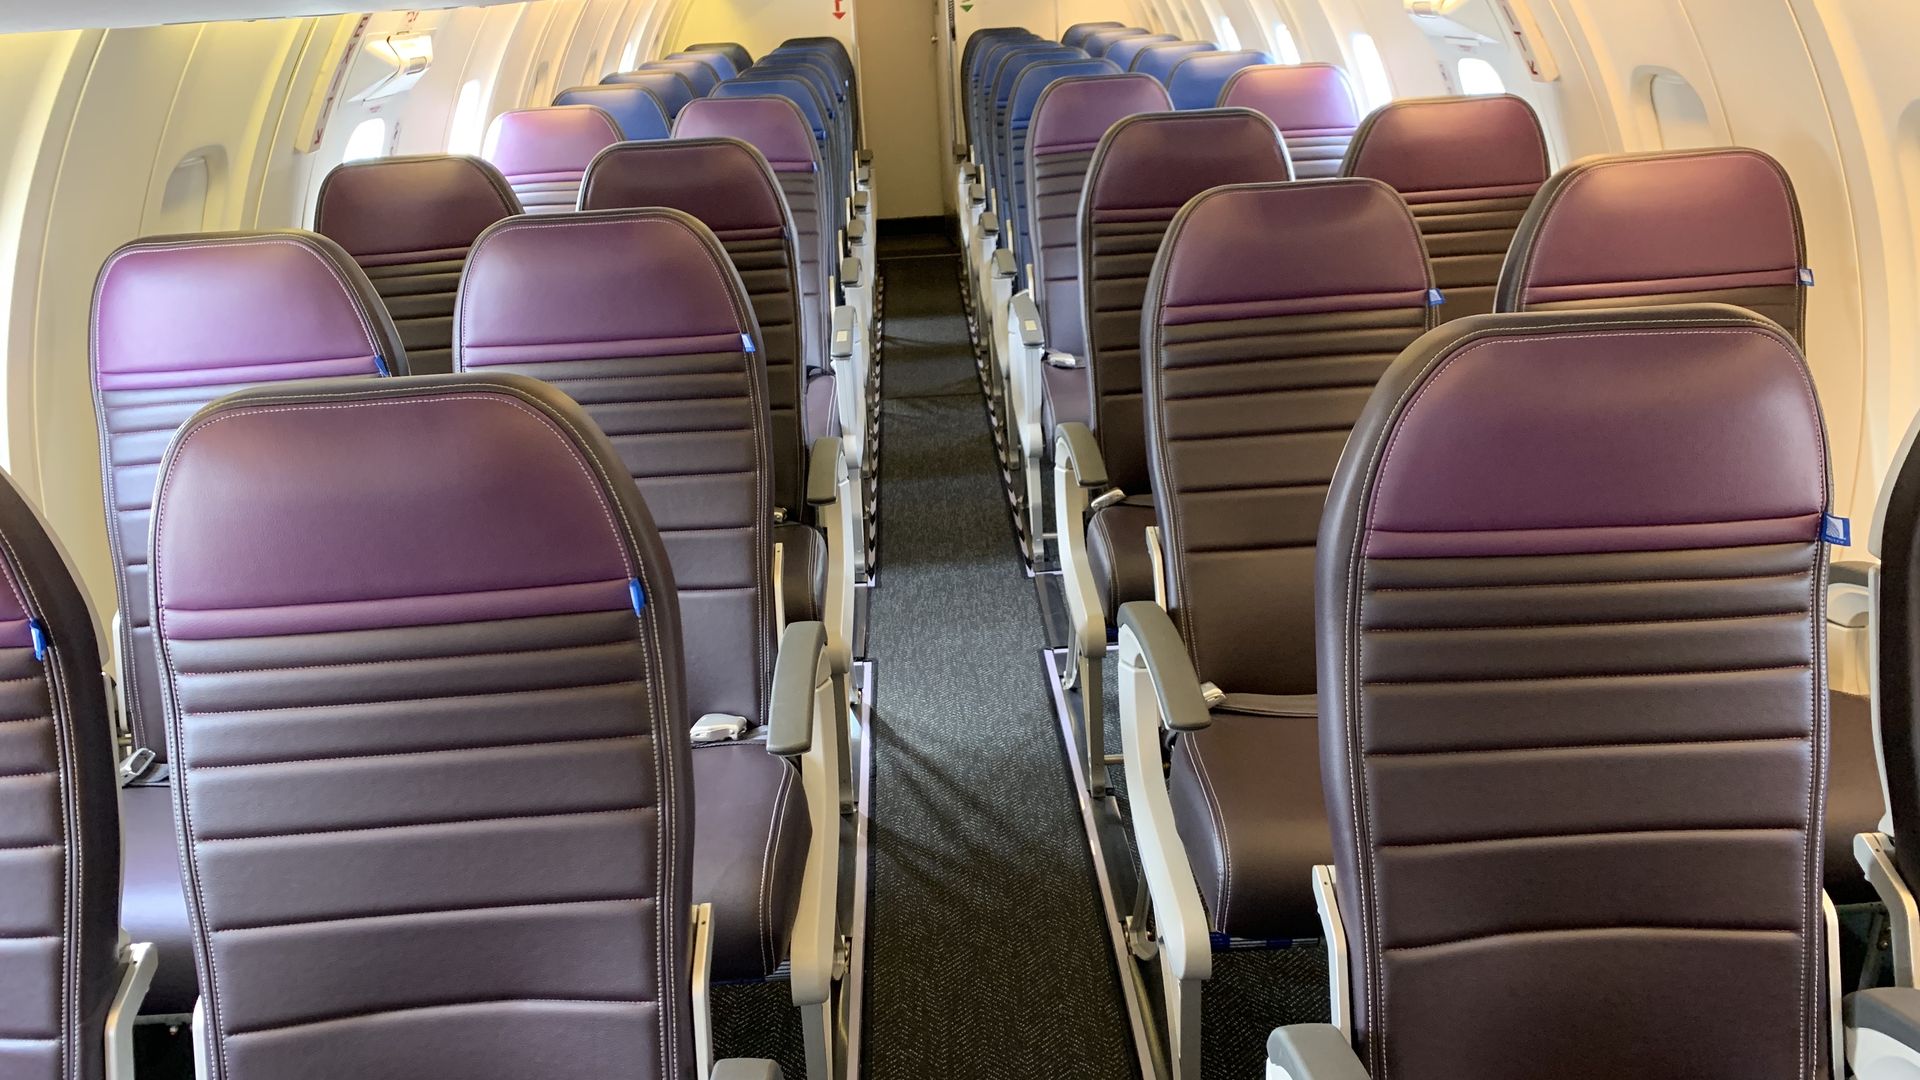 Image of interior of United's new regional jet, with more legroom and storage space